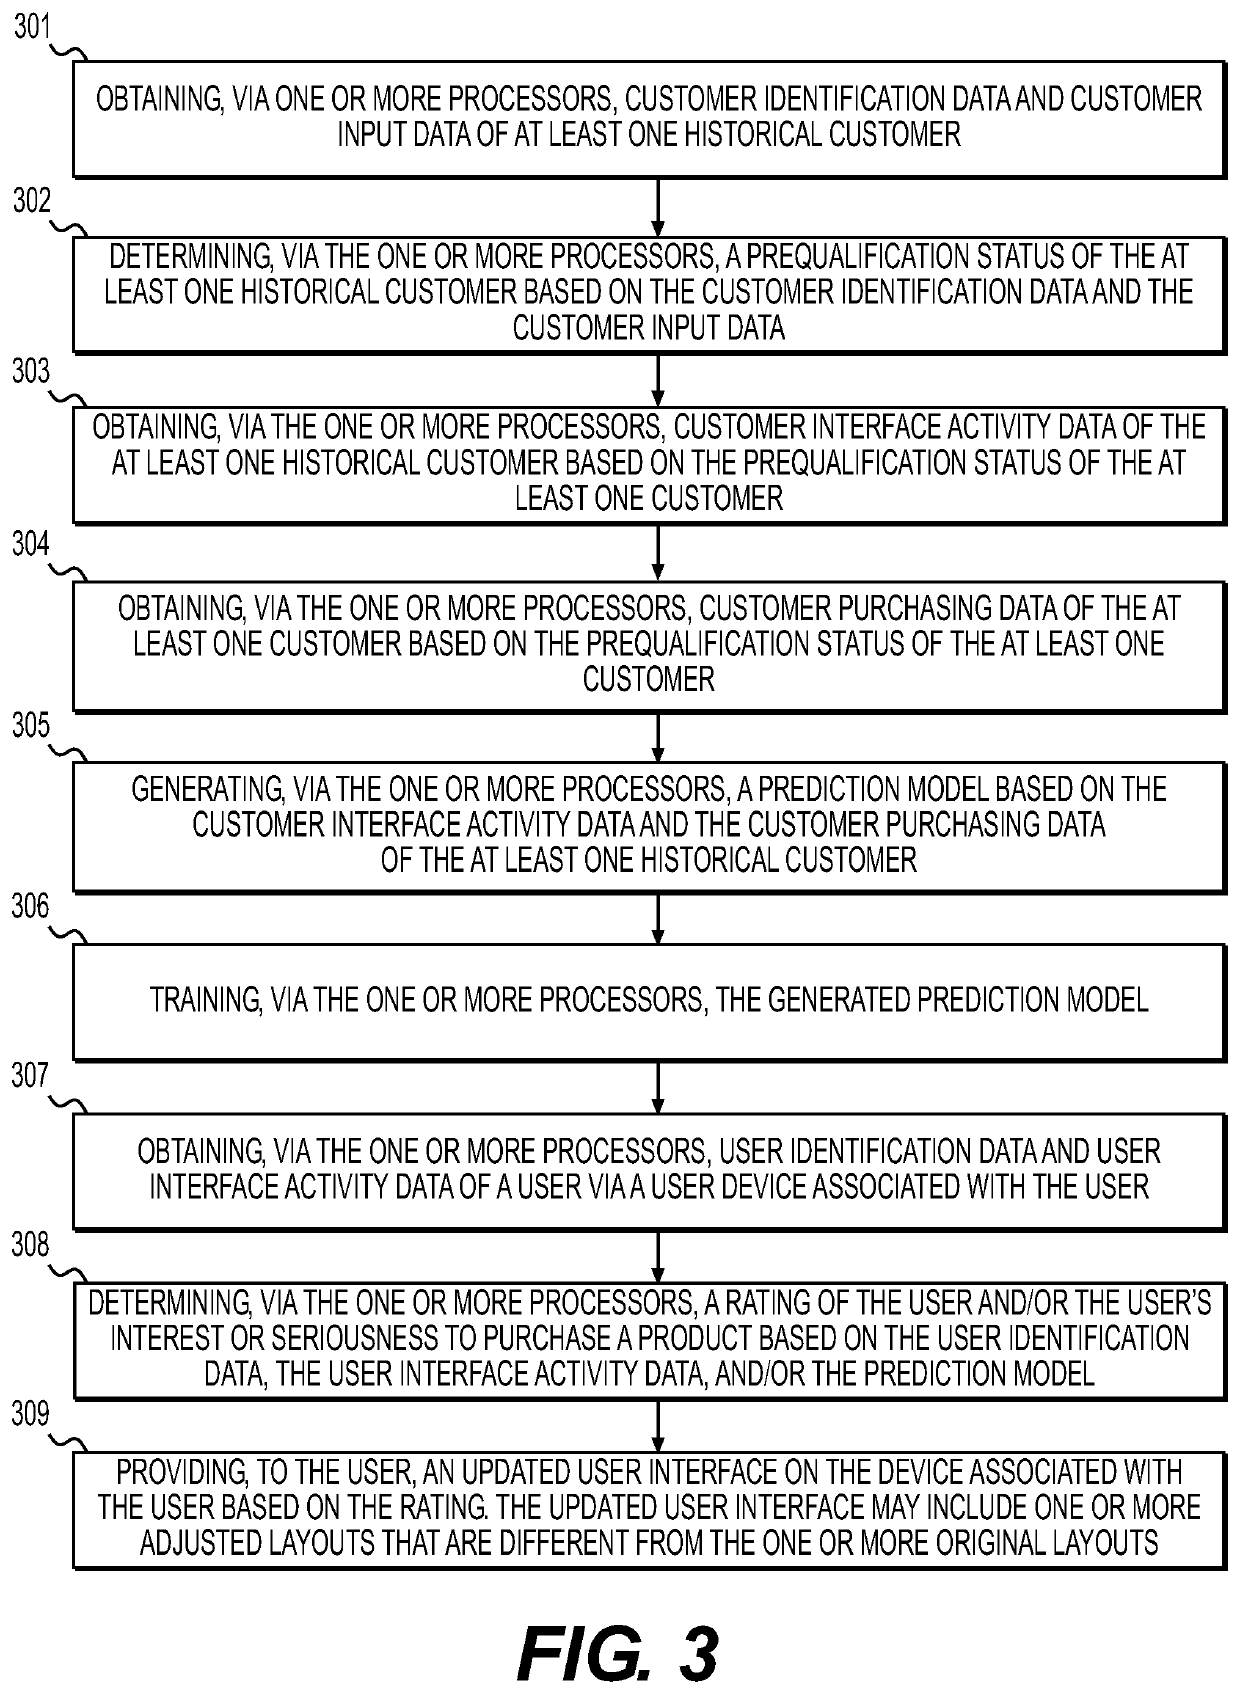 Methods and systems for updating a user interface based on level of user interest